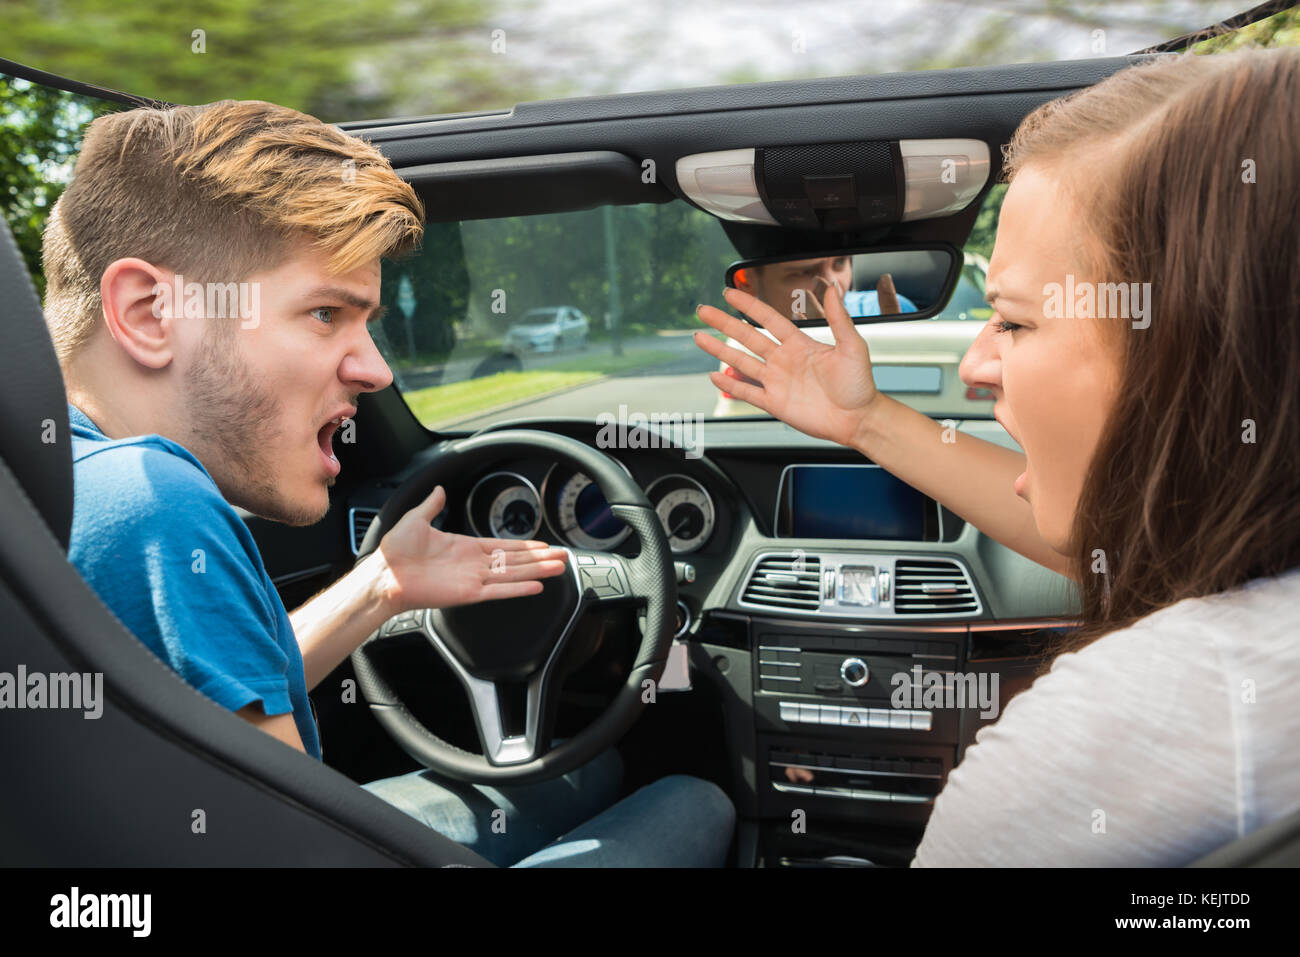 Unhappy Young Couple Quarreling In A Car Stock Photo